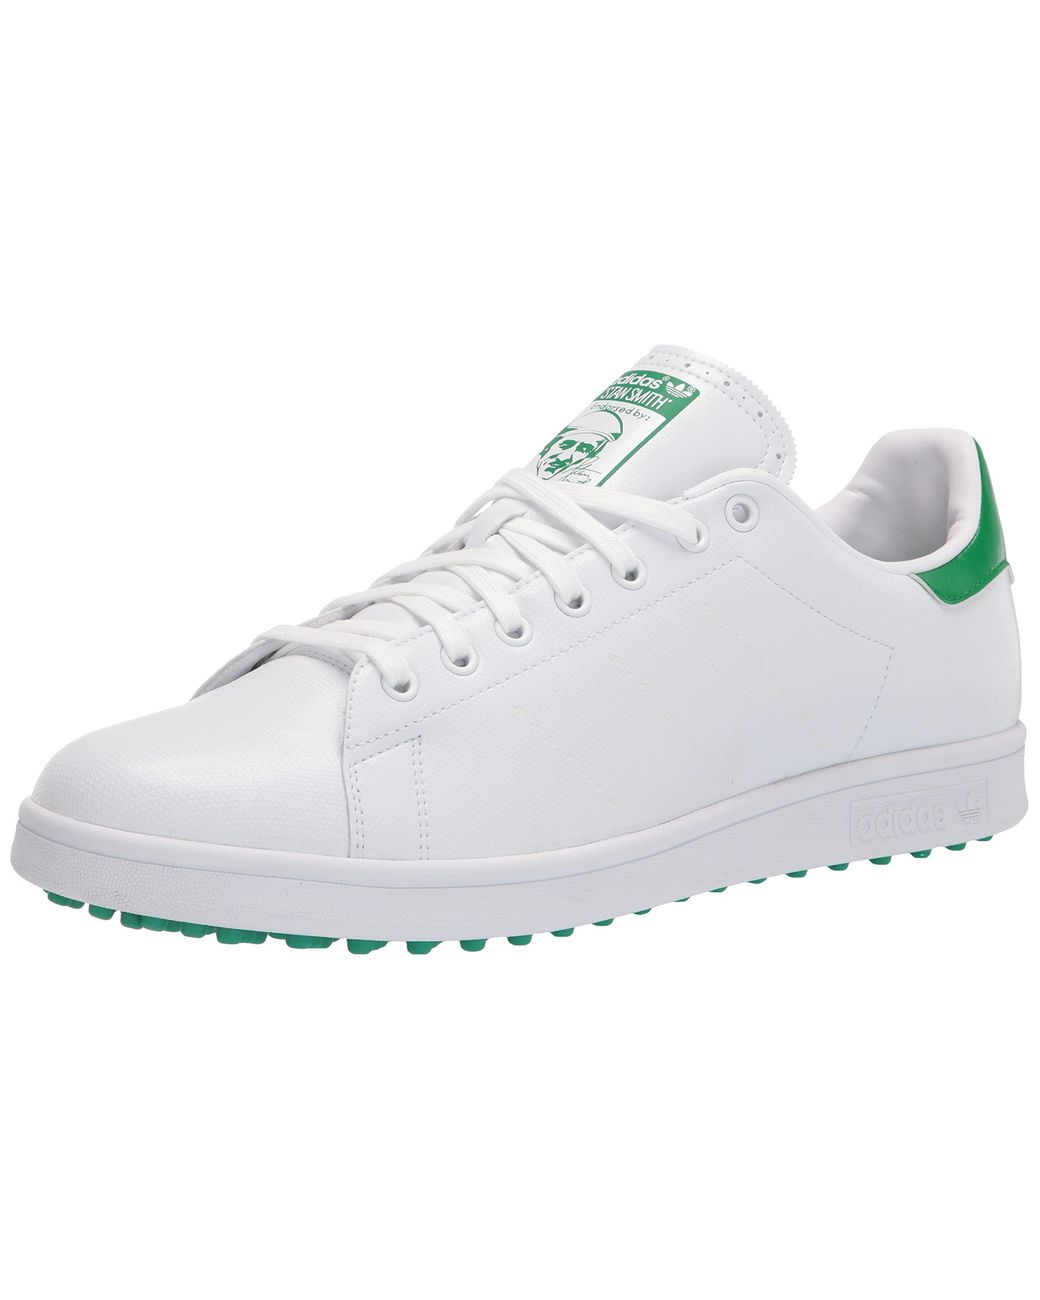 adidas Leather Mens Stan Smith Primegreen Special Edition Spikeless Golf  Shoe in White/Green/White (White) | Lyst